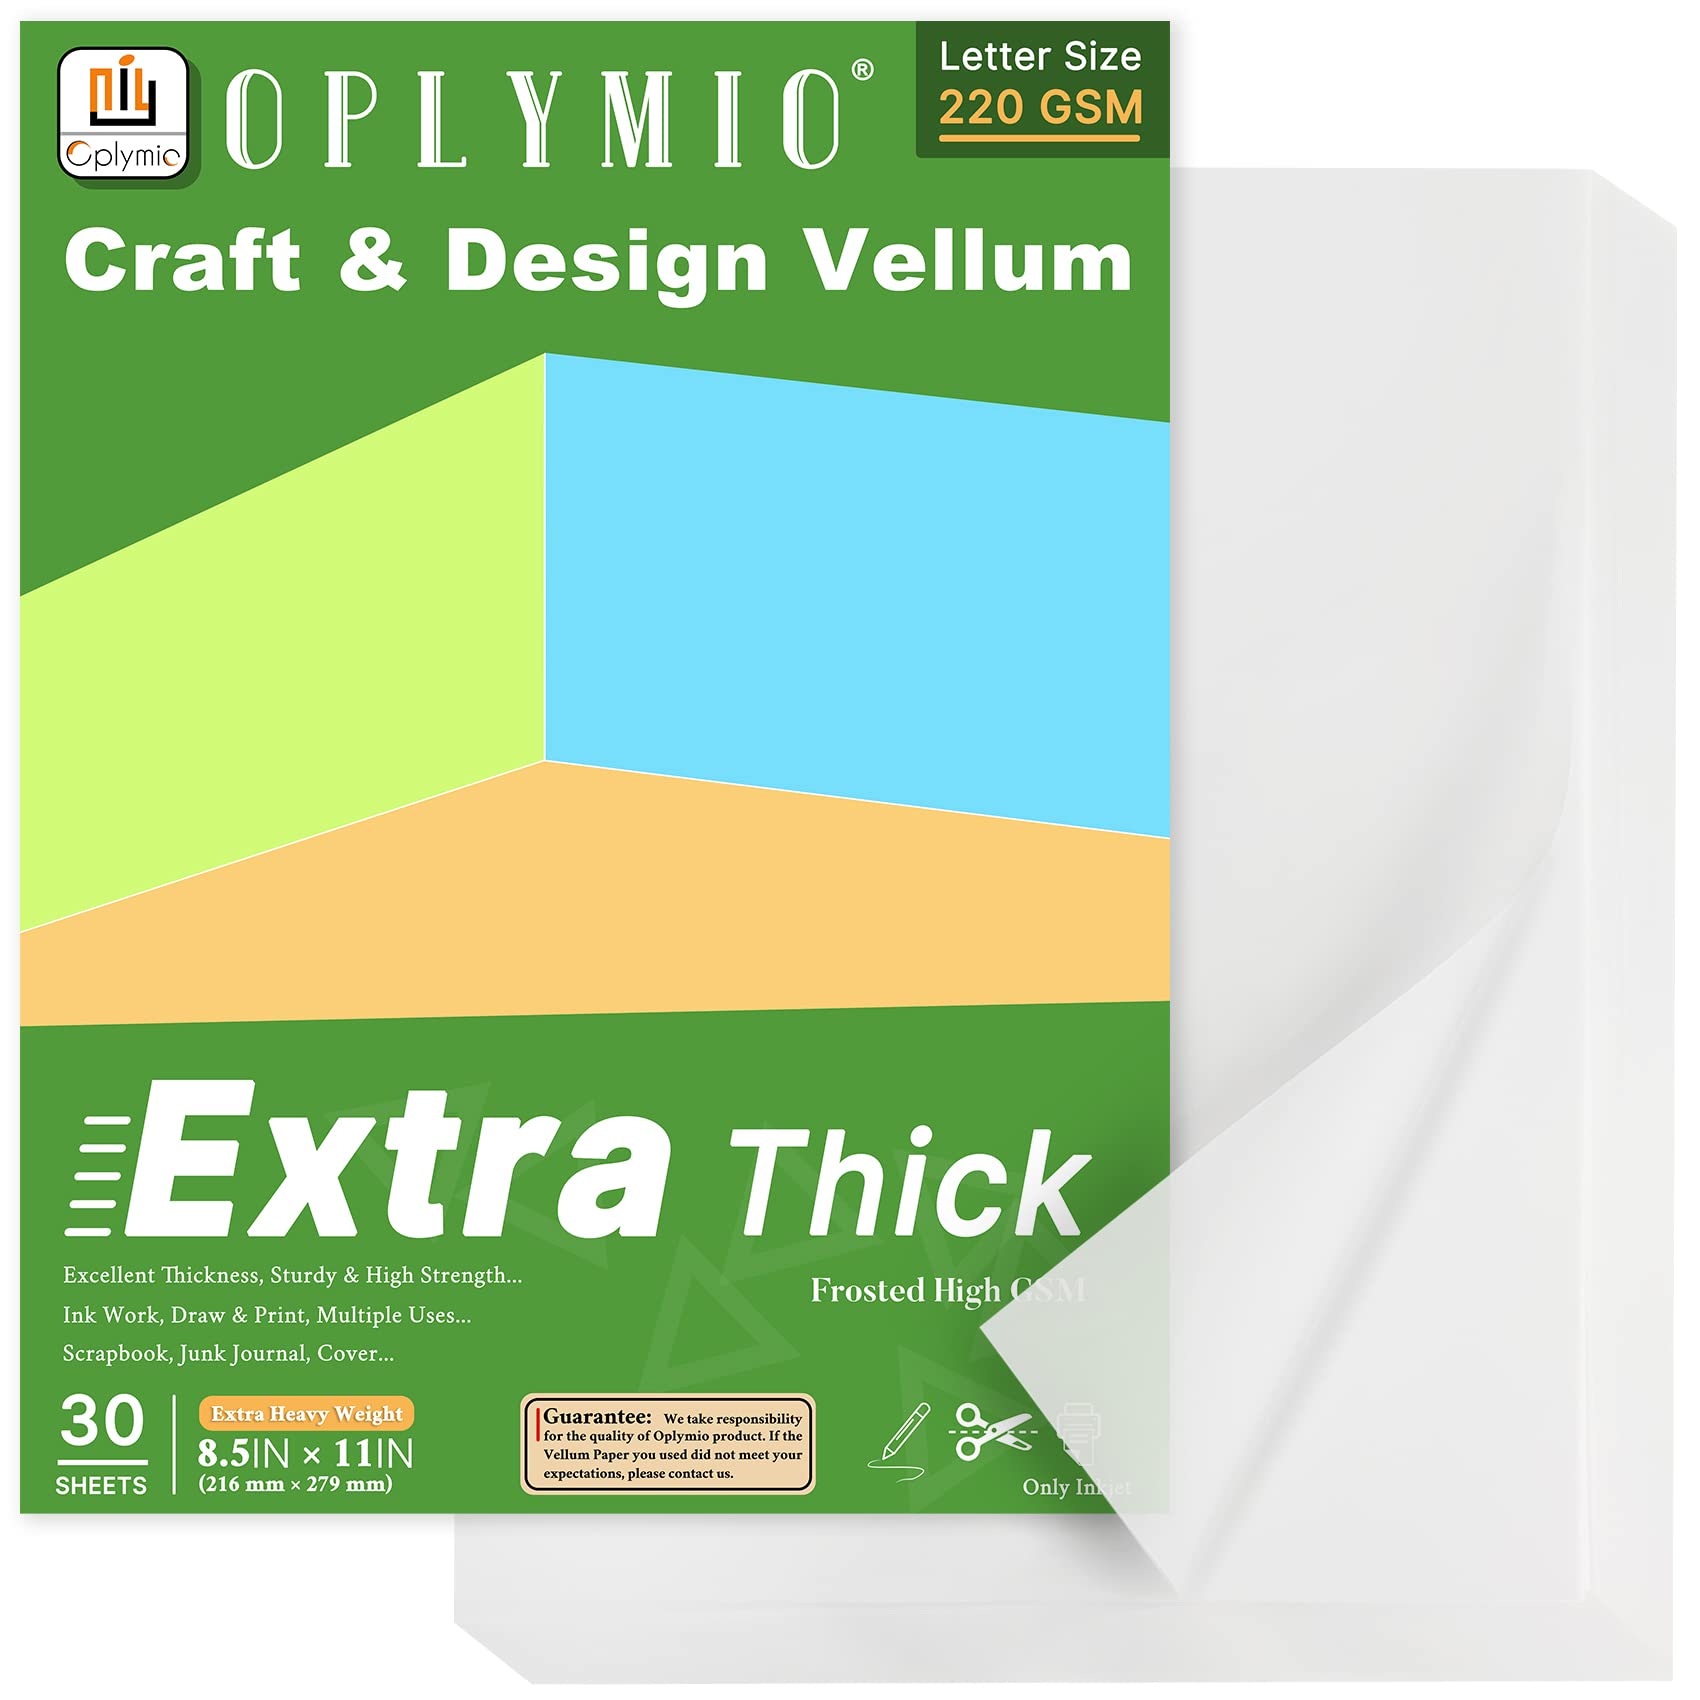 Extra Thick Vellum Paper Oplymio 220GSM 8.5 x 11 inches Printable